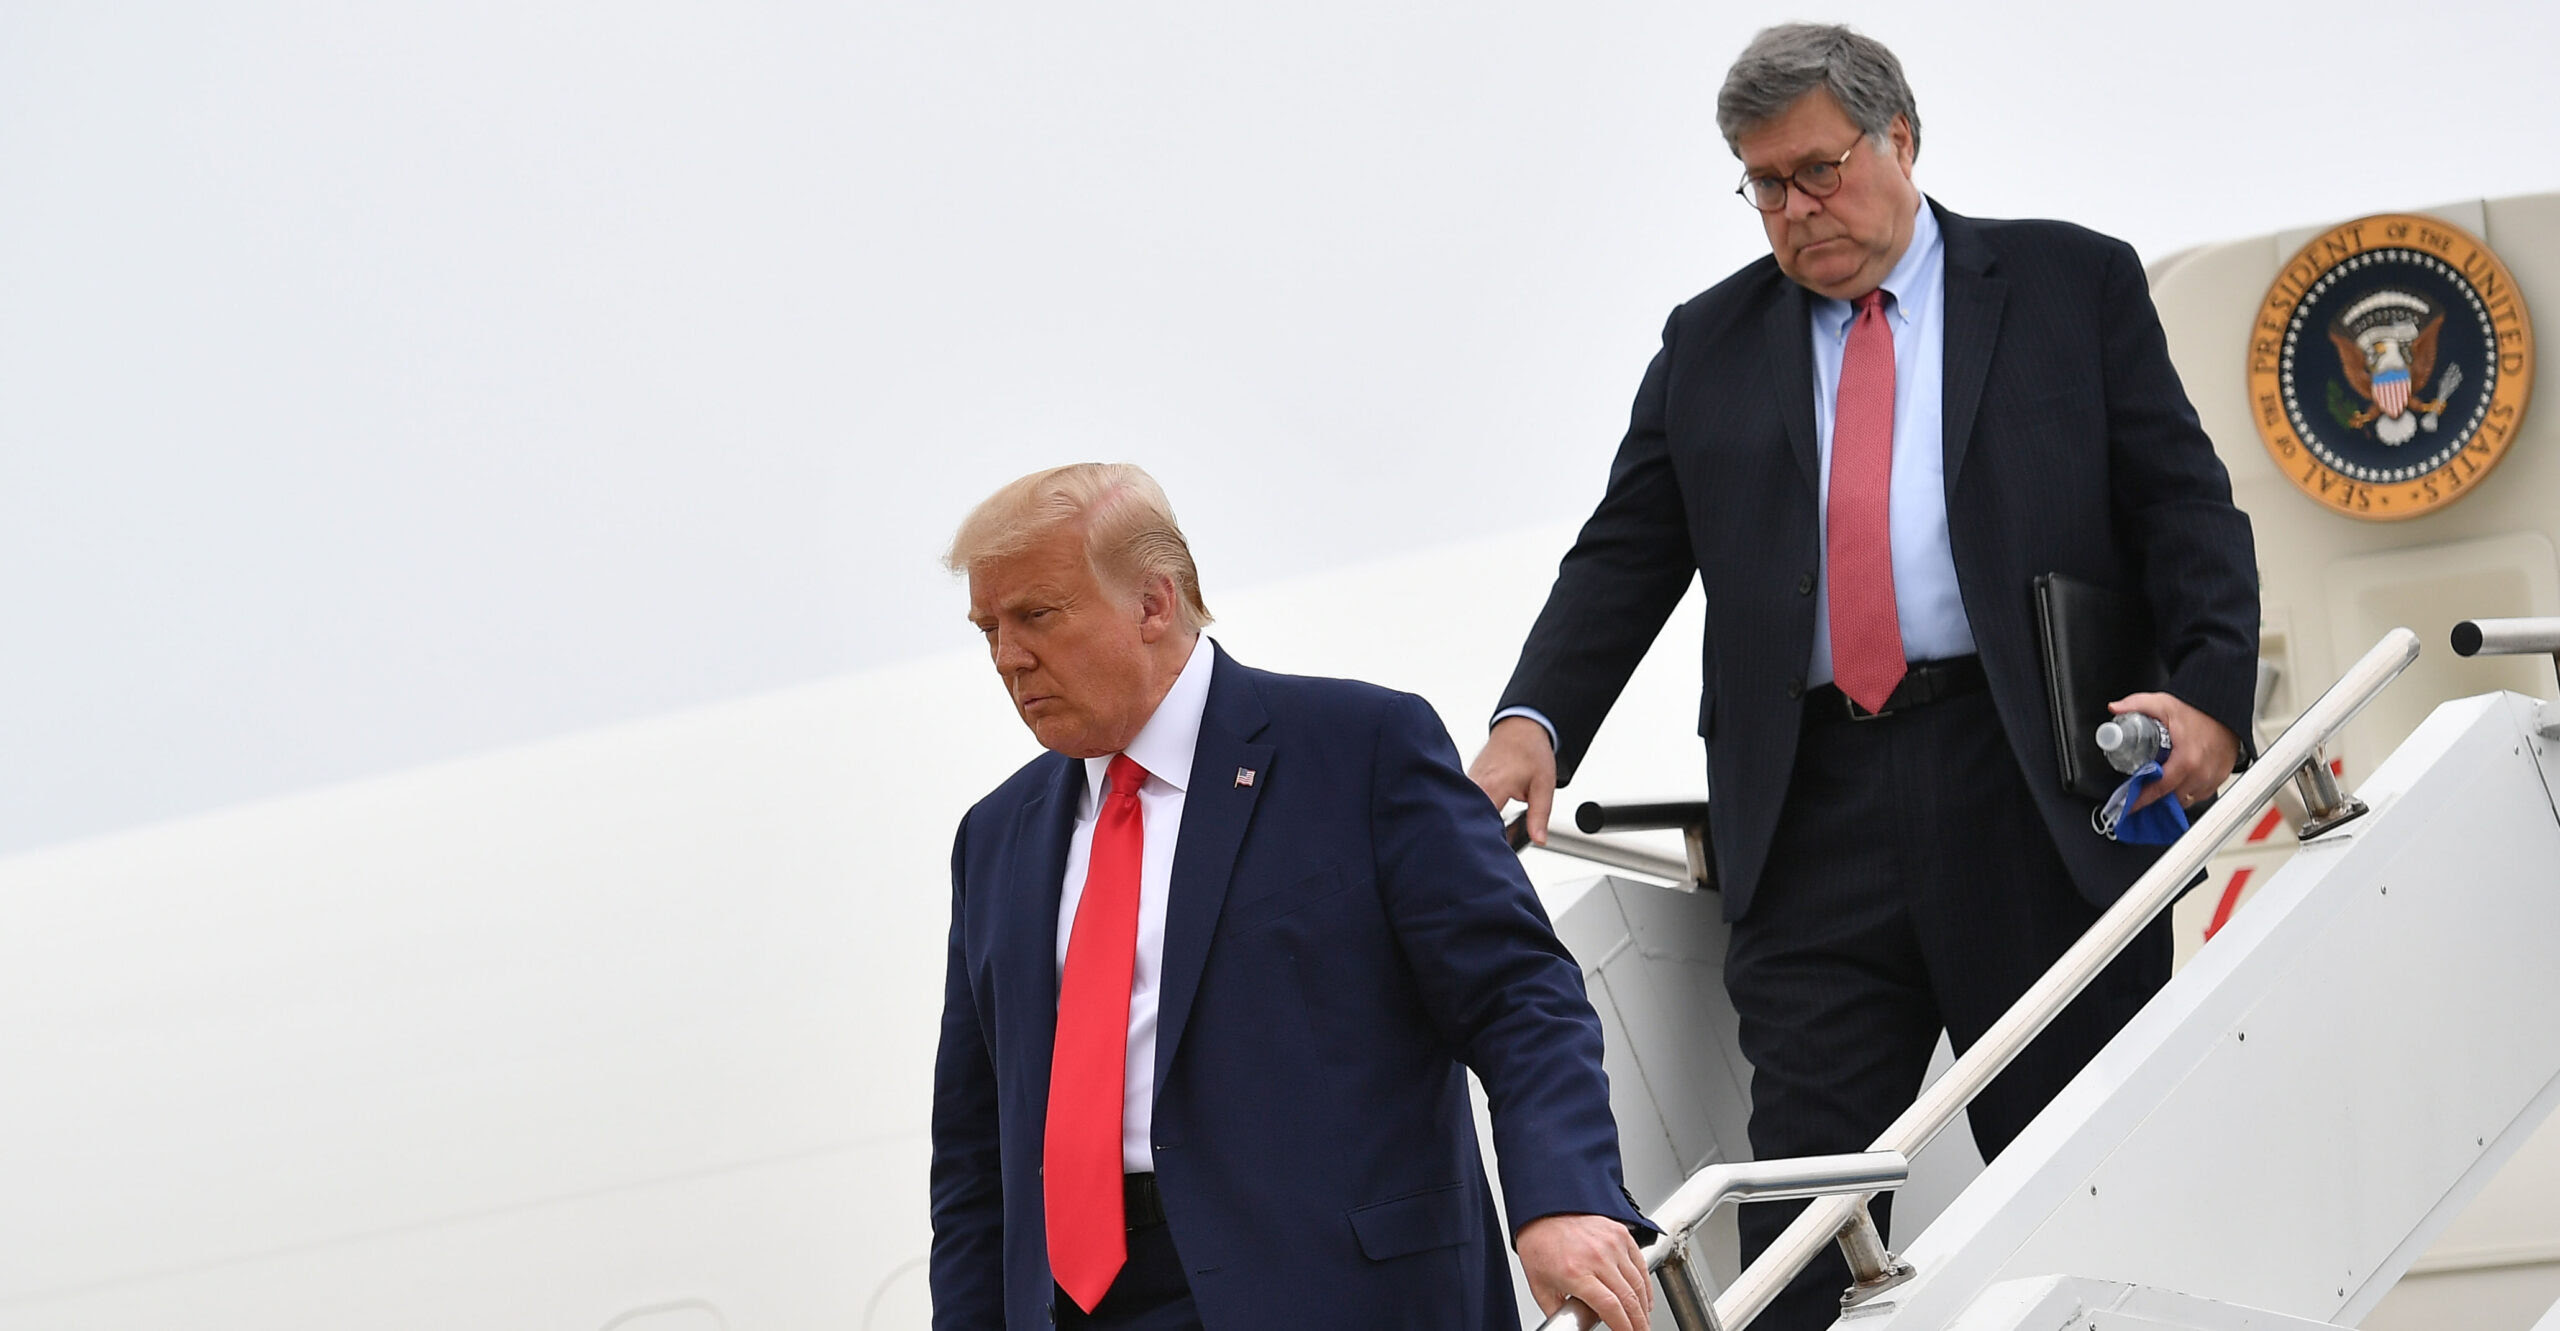 Trump Brands Barr, McConnell RINOs for Dismissing Claims of ‘Rigged’ 2020 Election